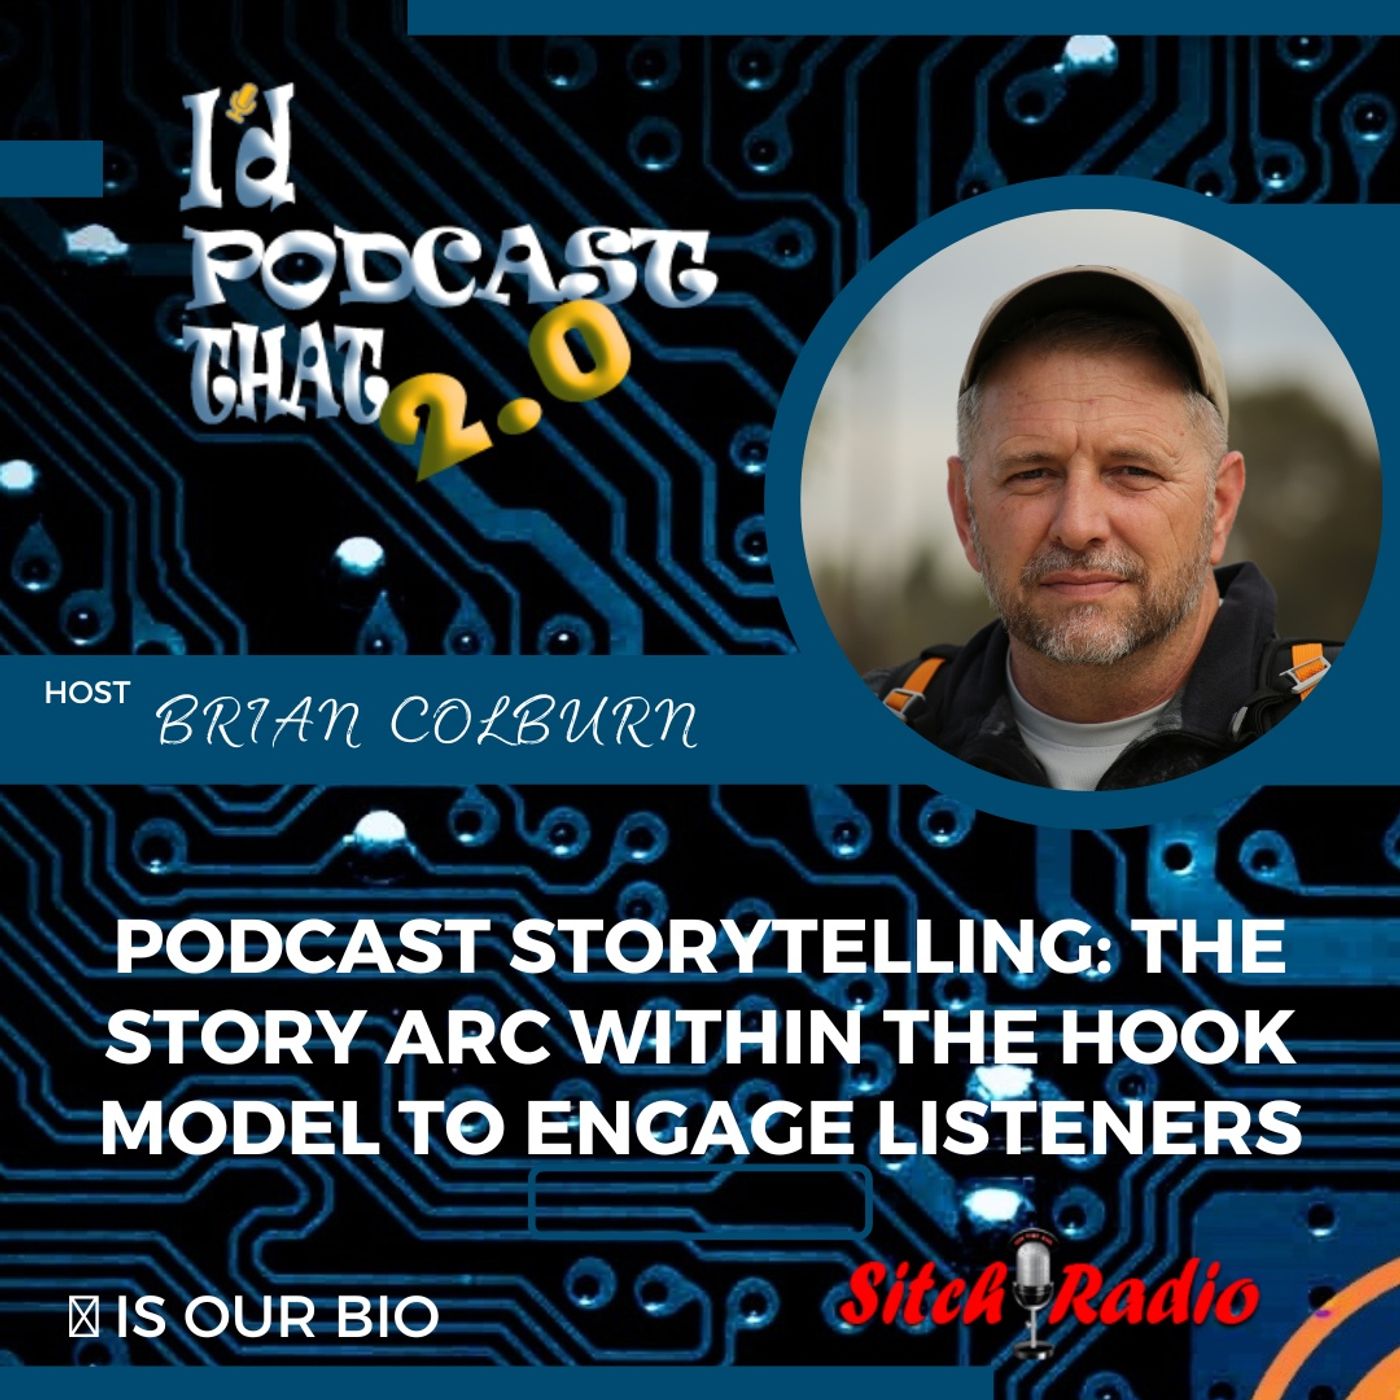 Podcast Storytelling The Story Arc within the Hook Model to Engage Listeners